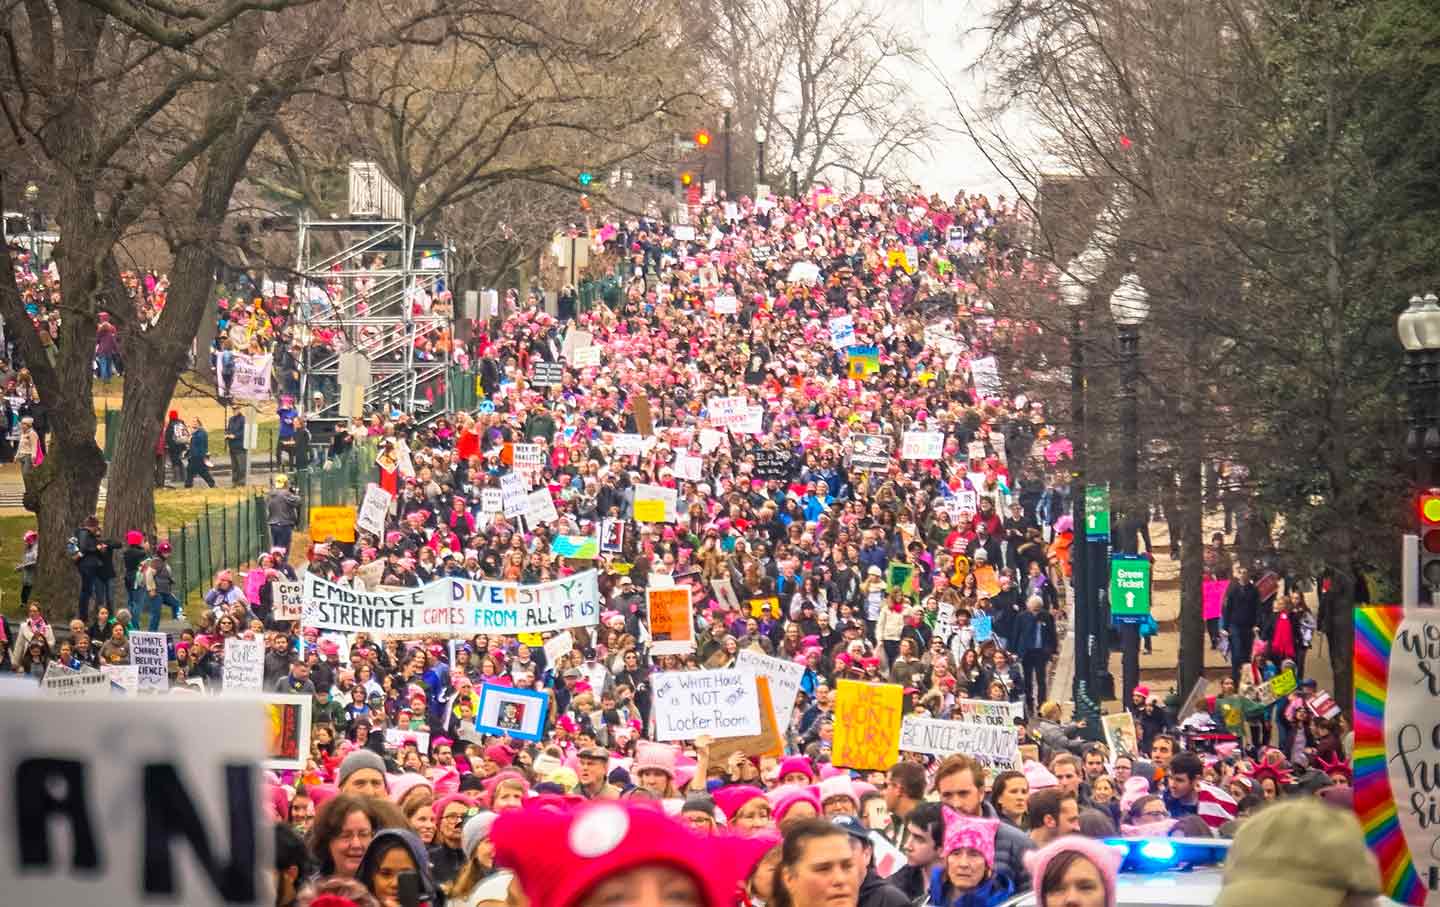 Turning the Women’s March Into a Mass Movement Was Never Going to Be Simple | The Nation